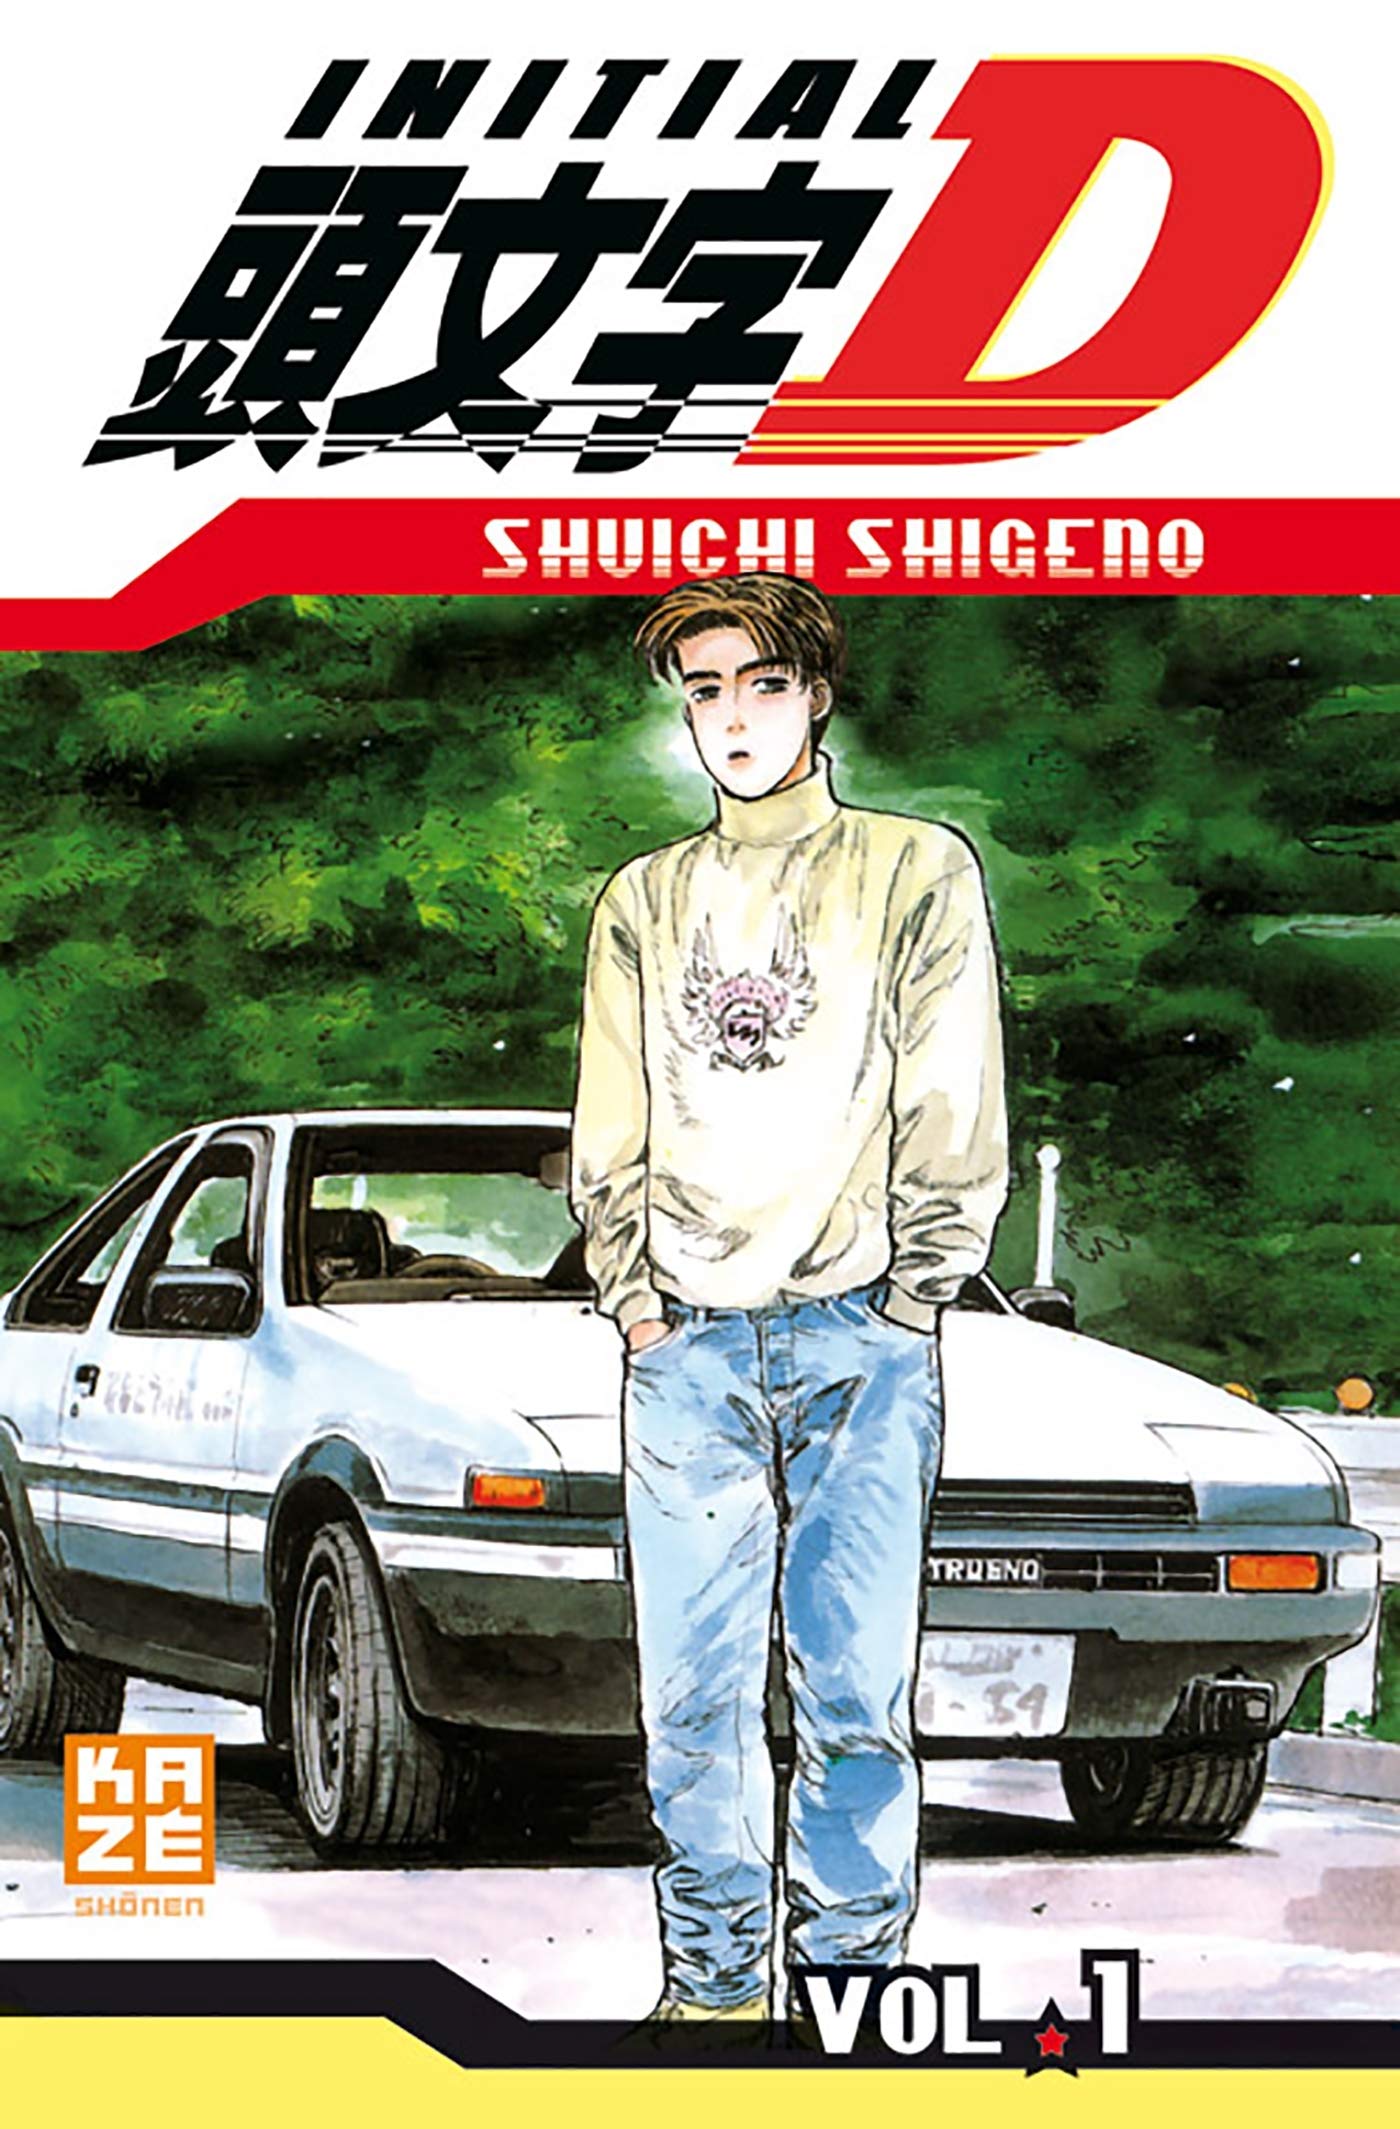 initial d extreme stage ps3 english